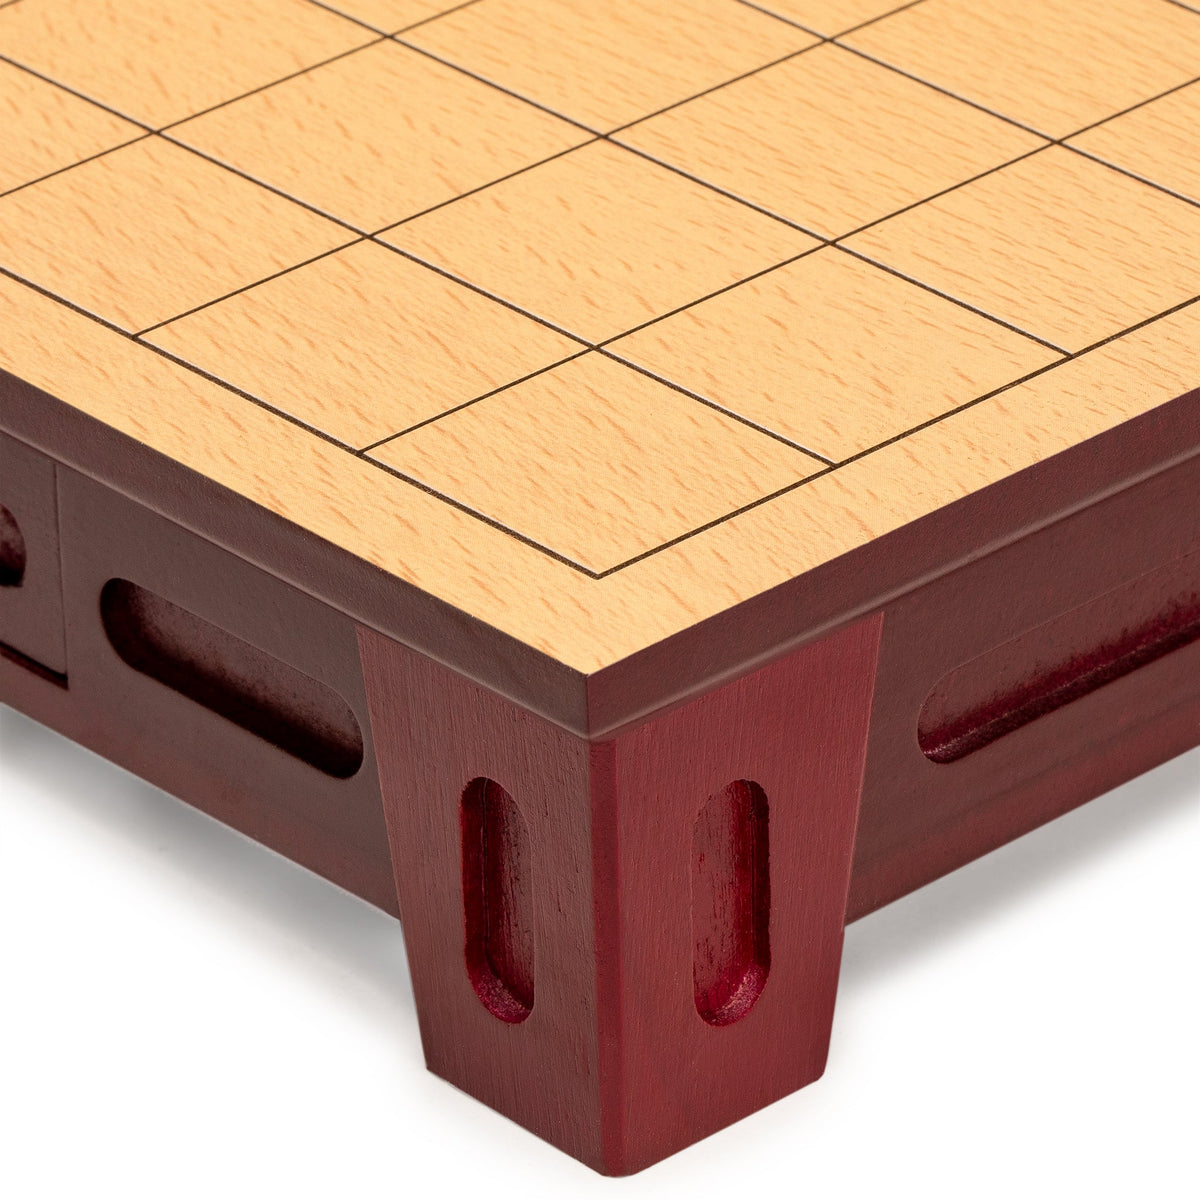 DX Shogi Japanese Chess Game Wooden Board and Koma Pieces Set